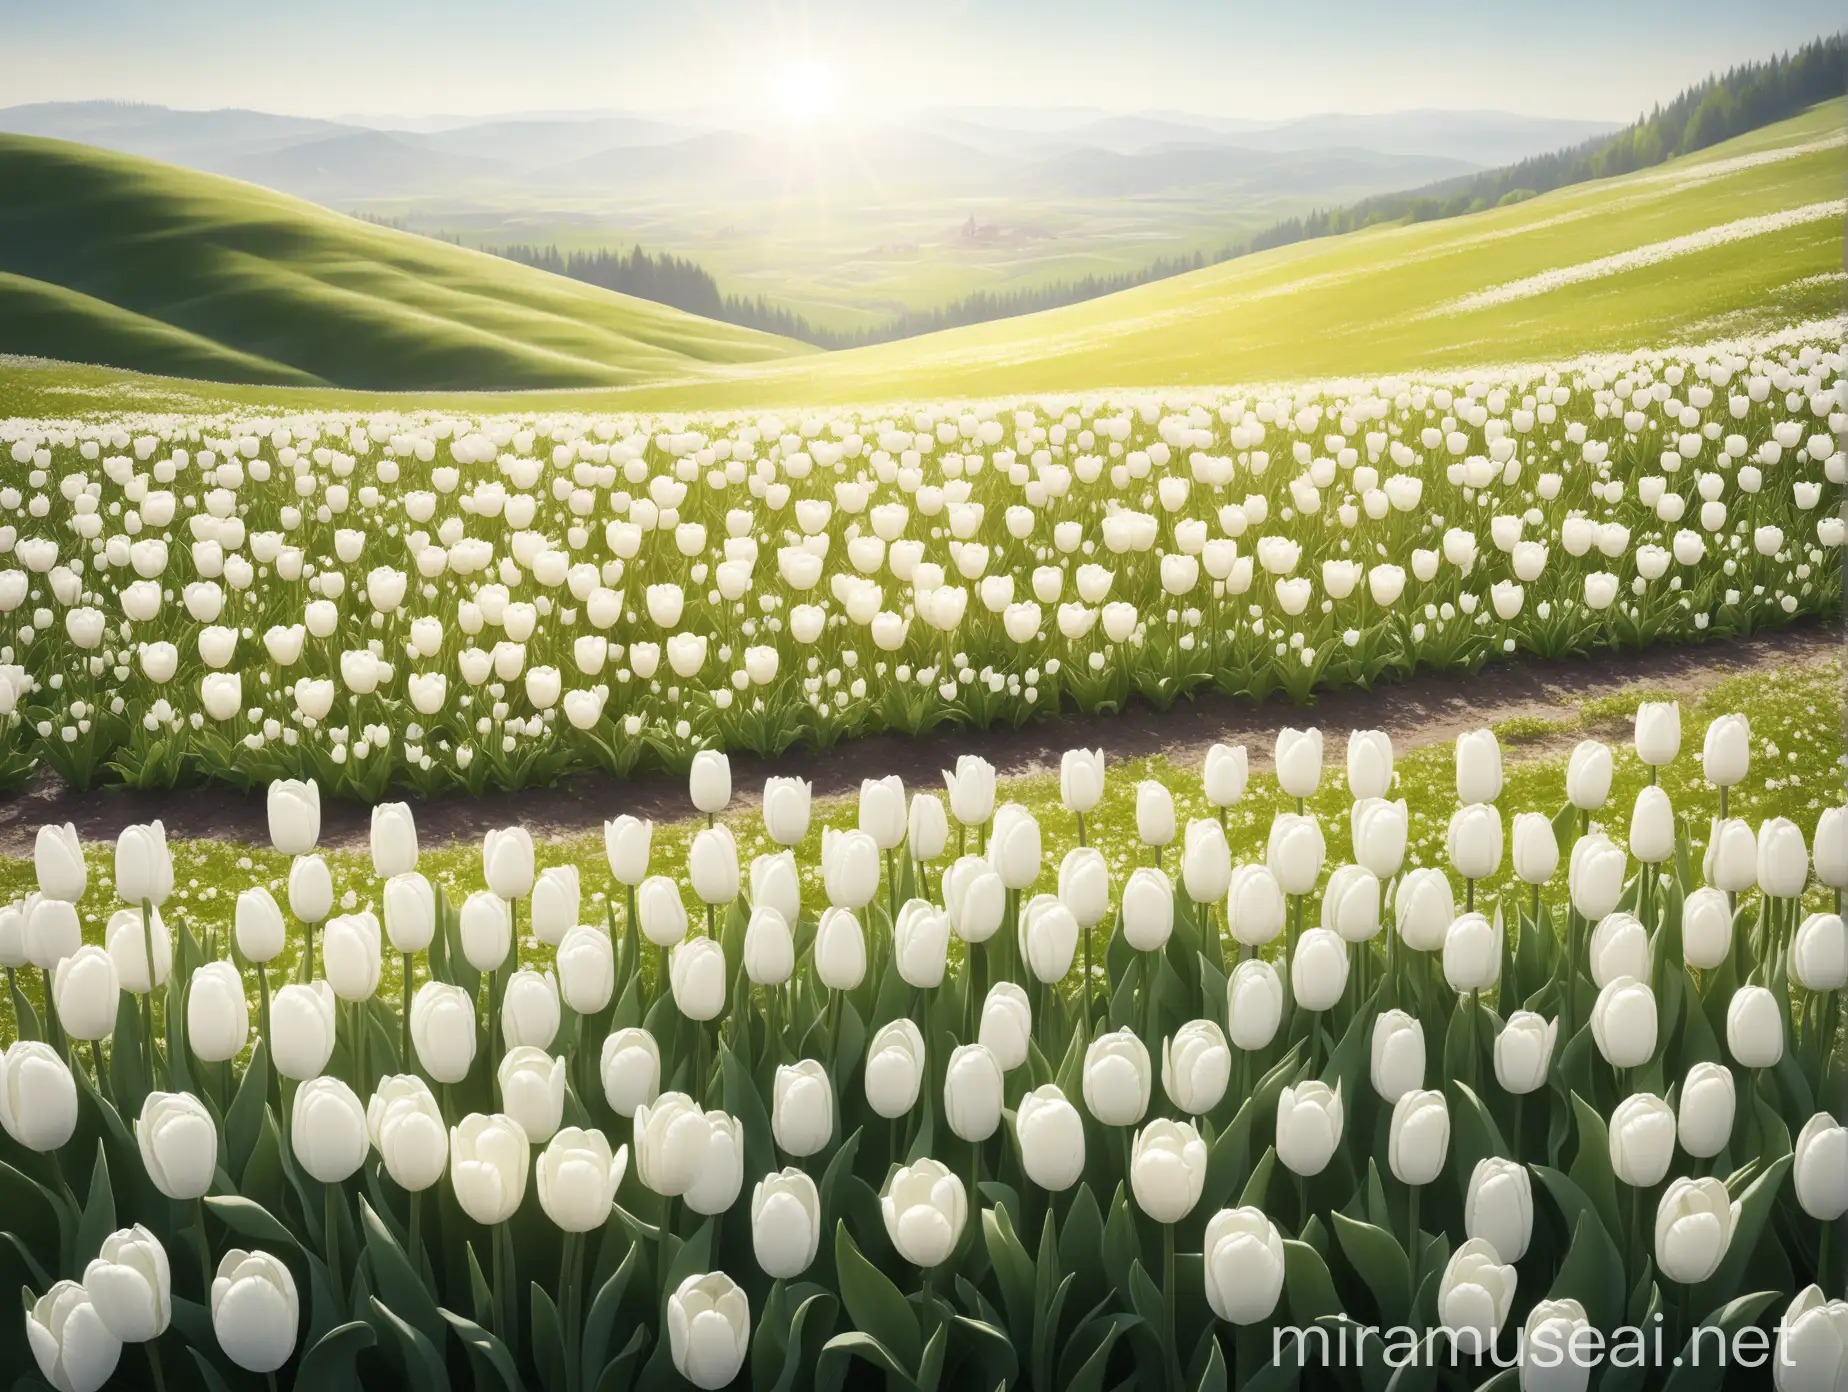 Flowerfield with white tulips, gentle hilltops in the background, sunlit